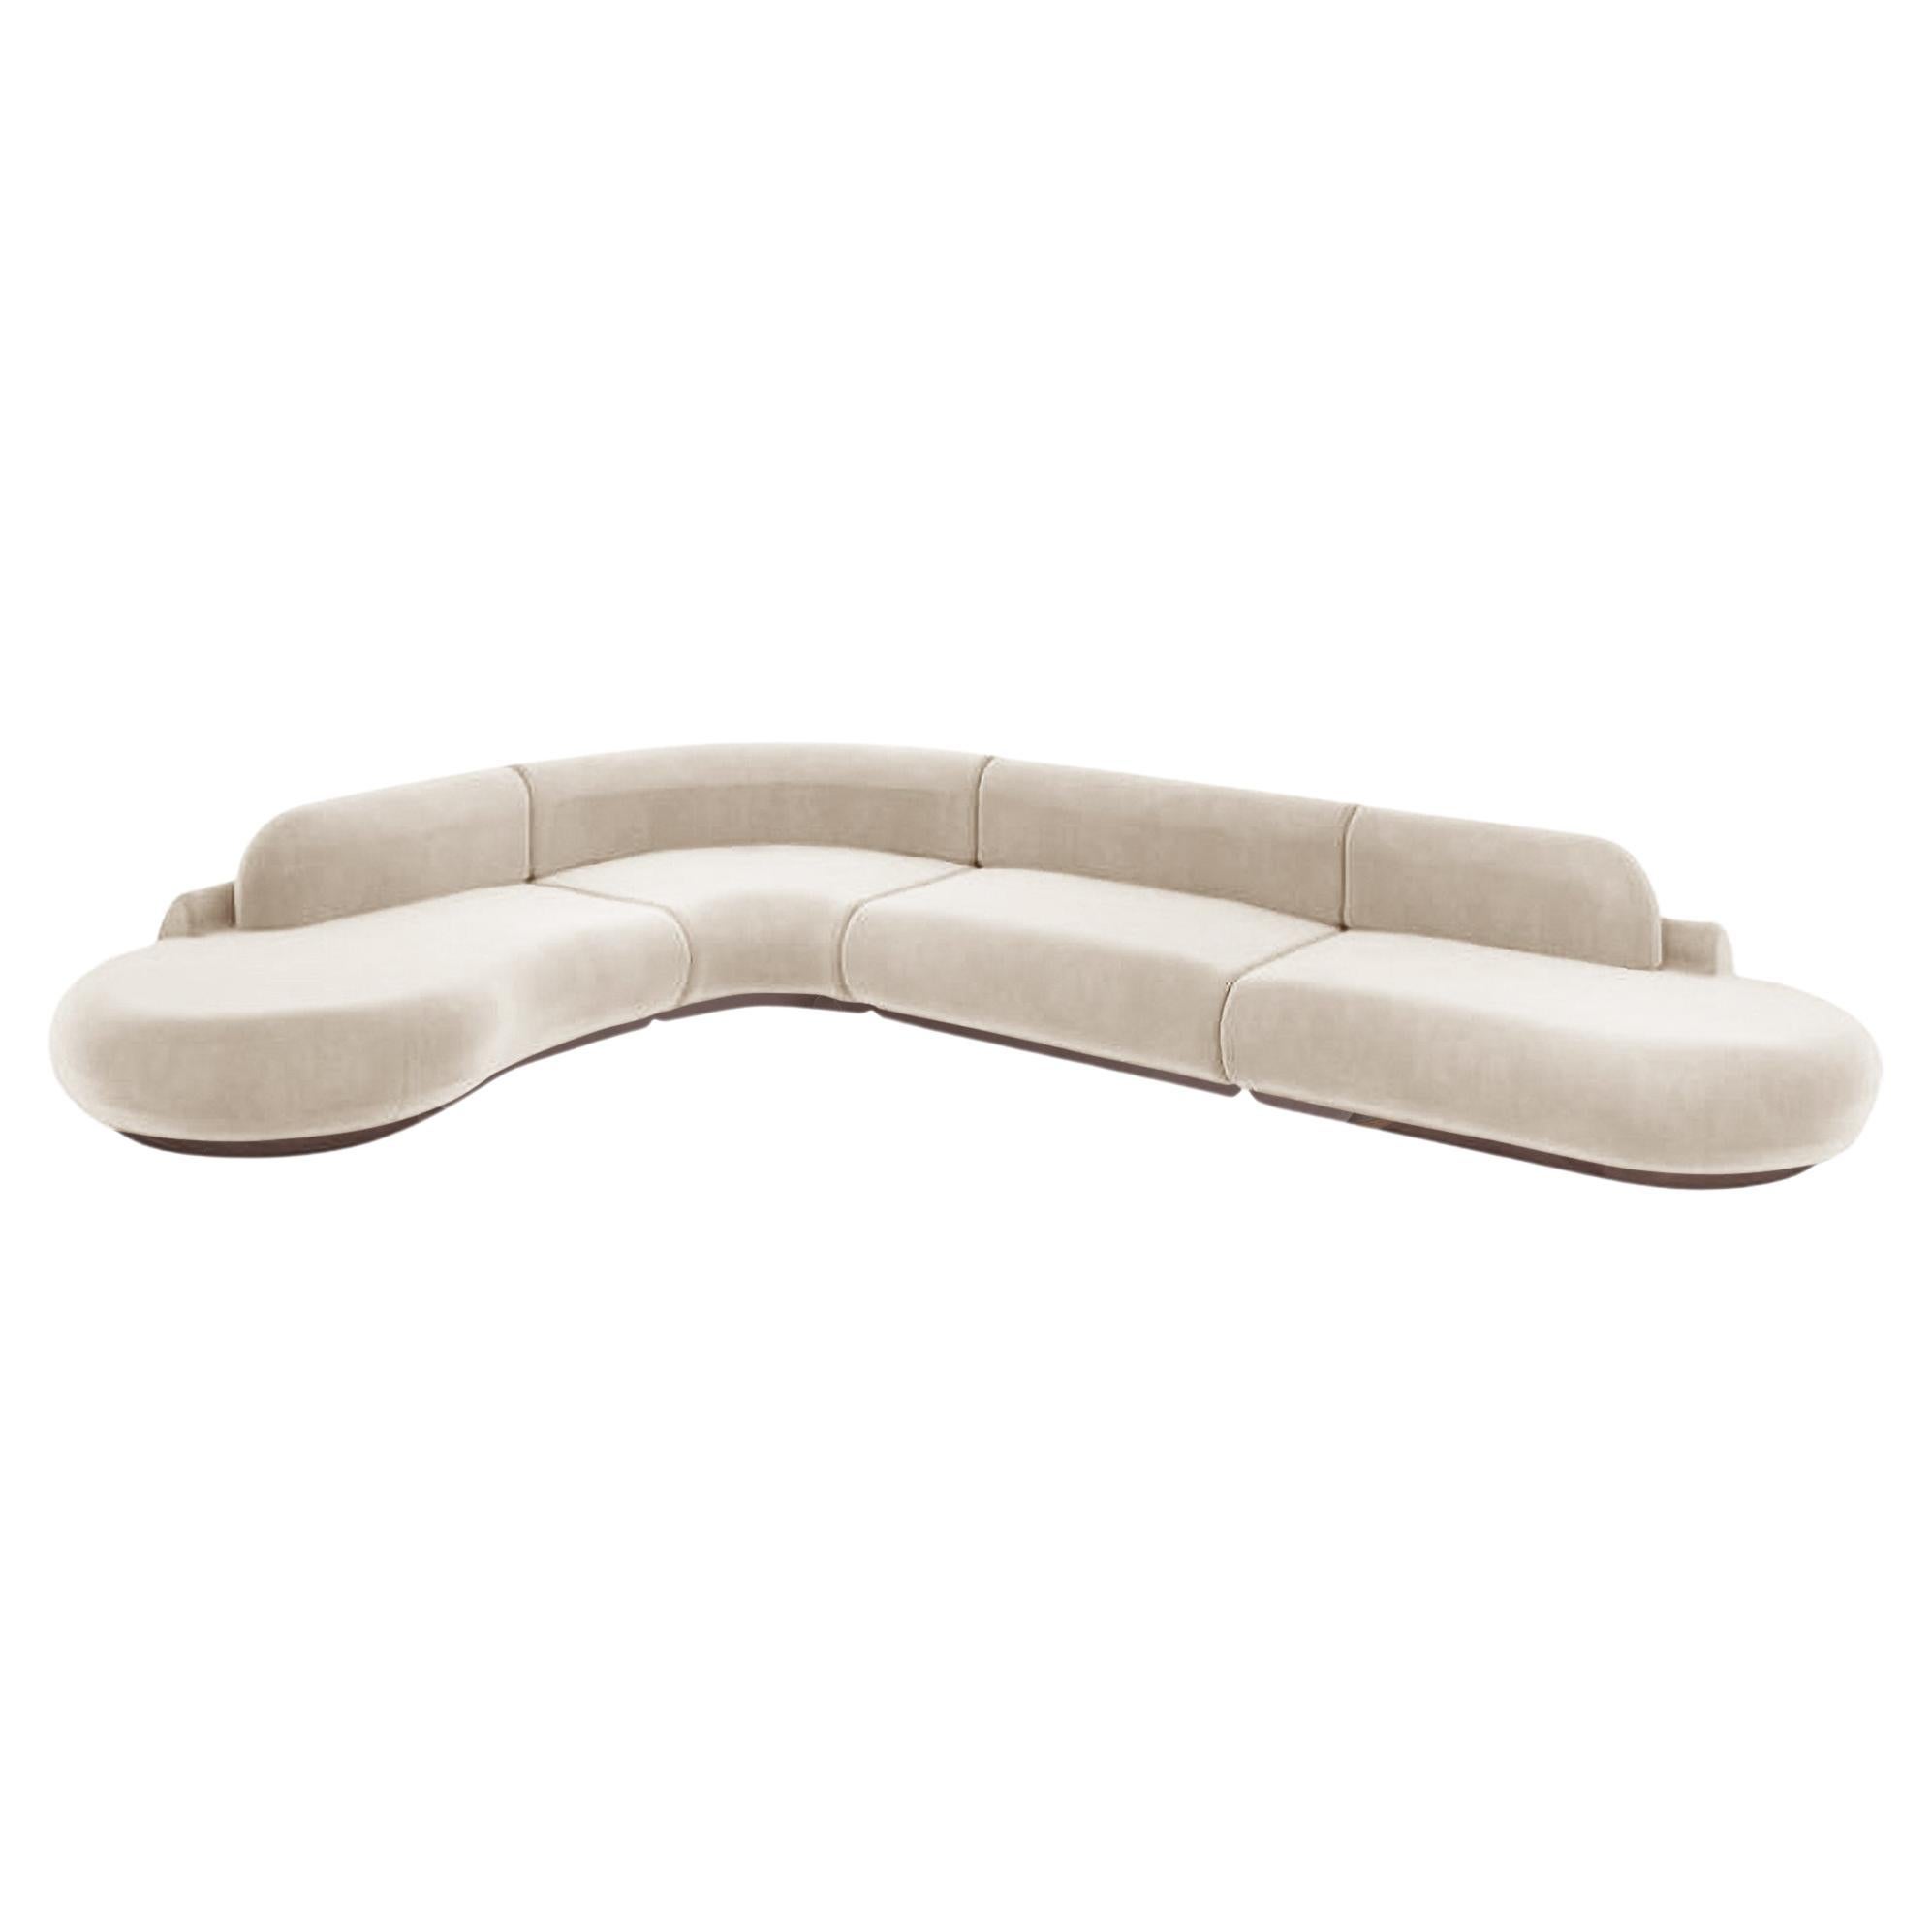 Naked Curved Sectional Sofa, 4 Piece with Beech Ash-056-1 and Boucle Snow